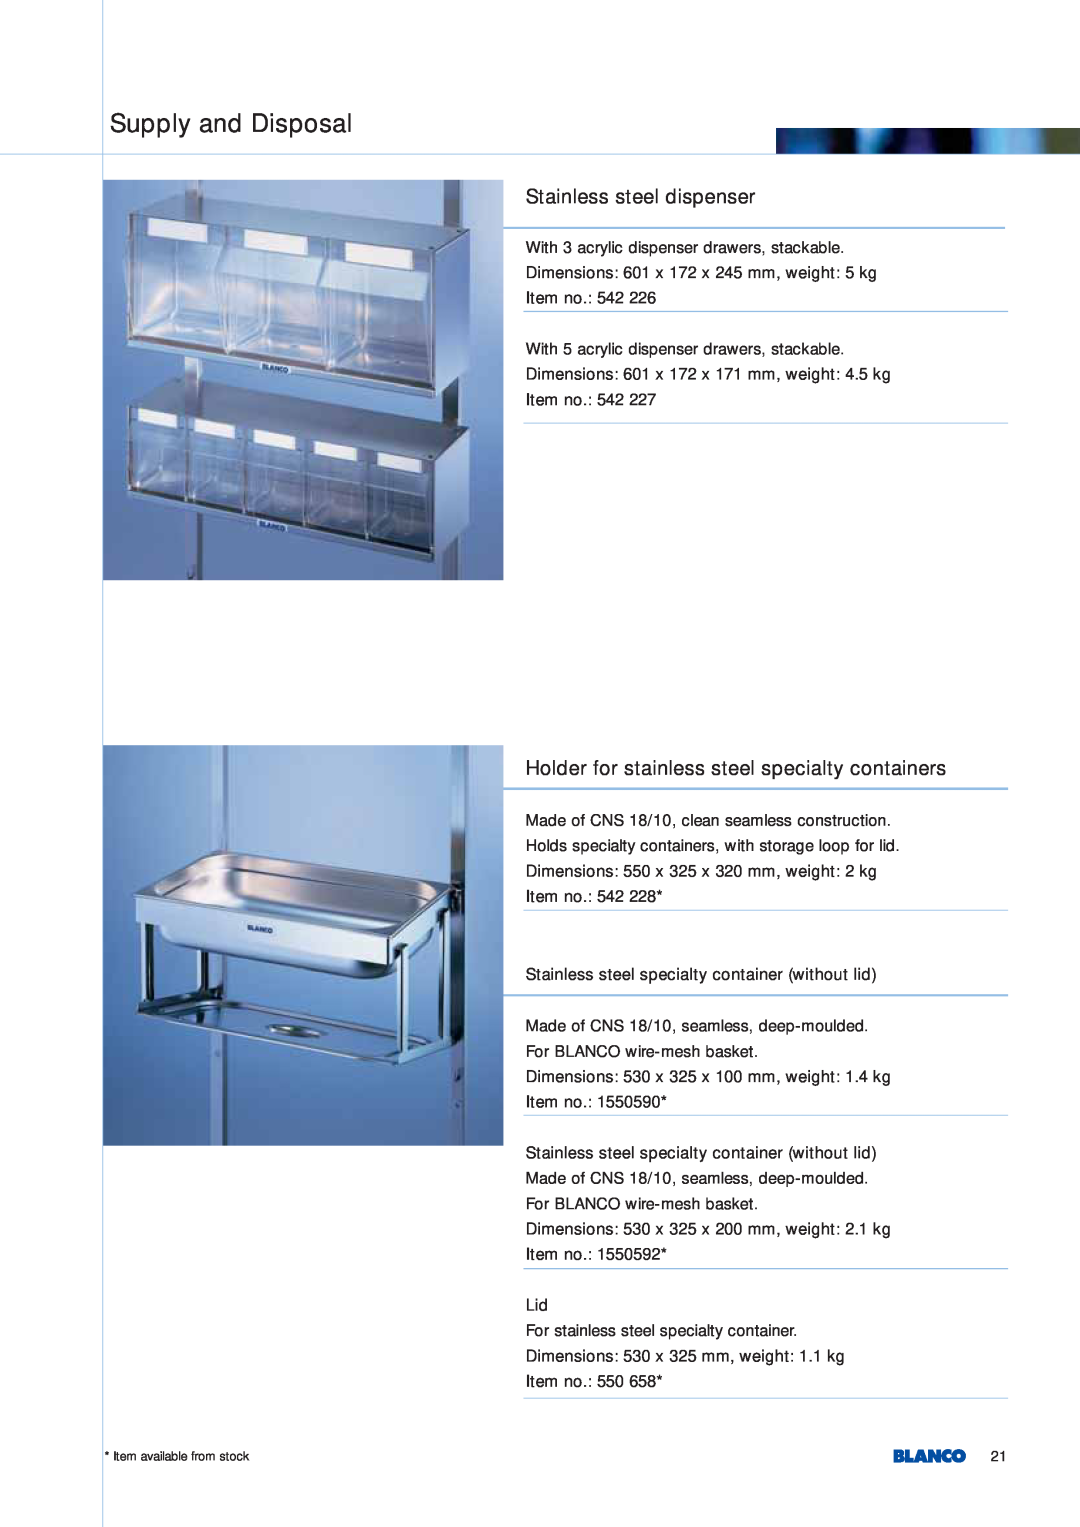 Blanco Tbingen manual Stainless steel dispenser, Holder for stainless steel specialty containers, Supply and Disposal 